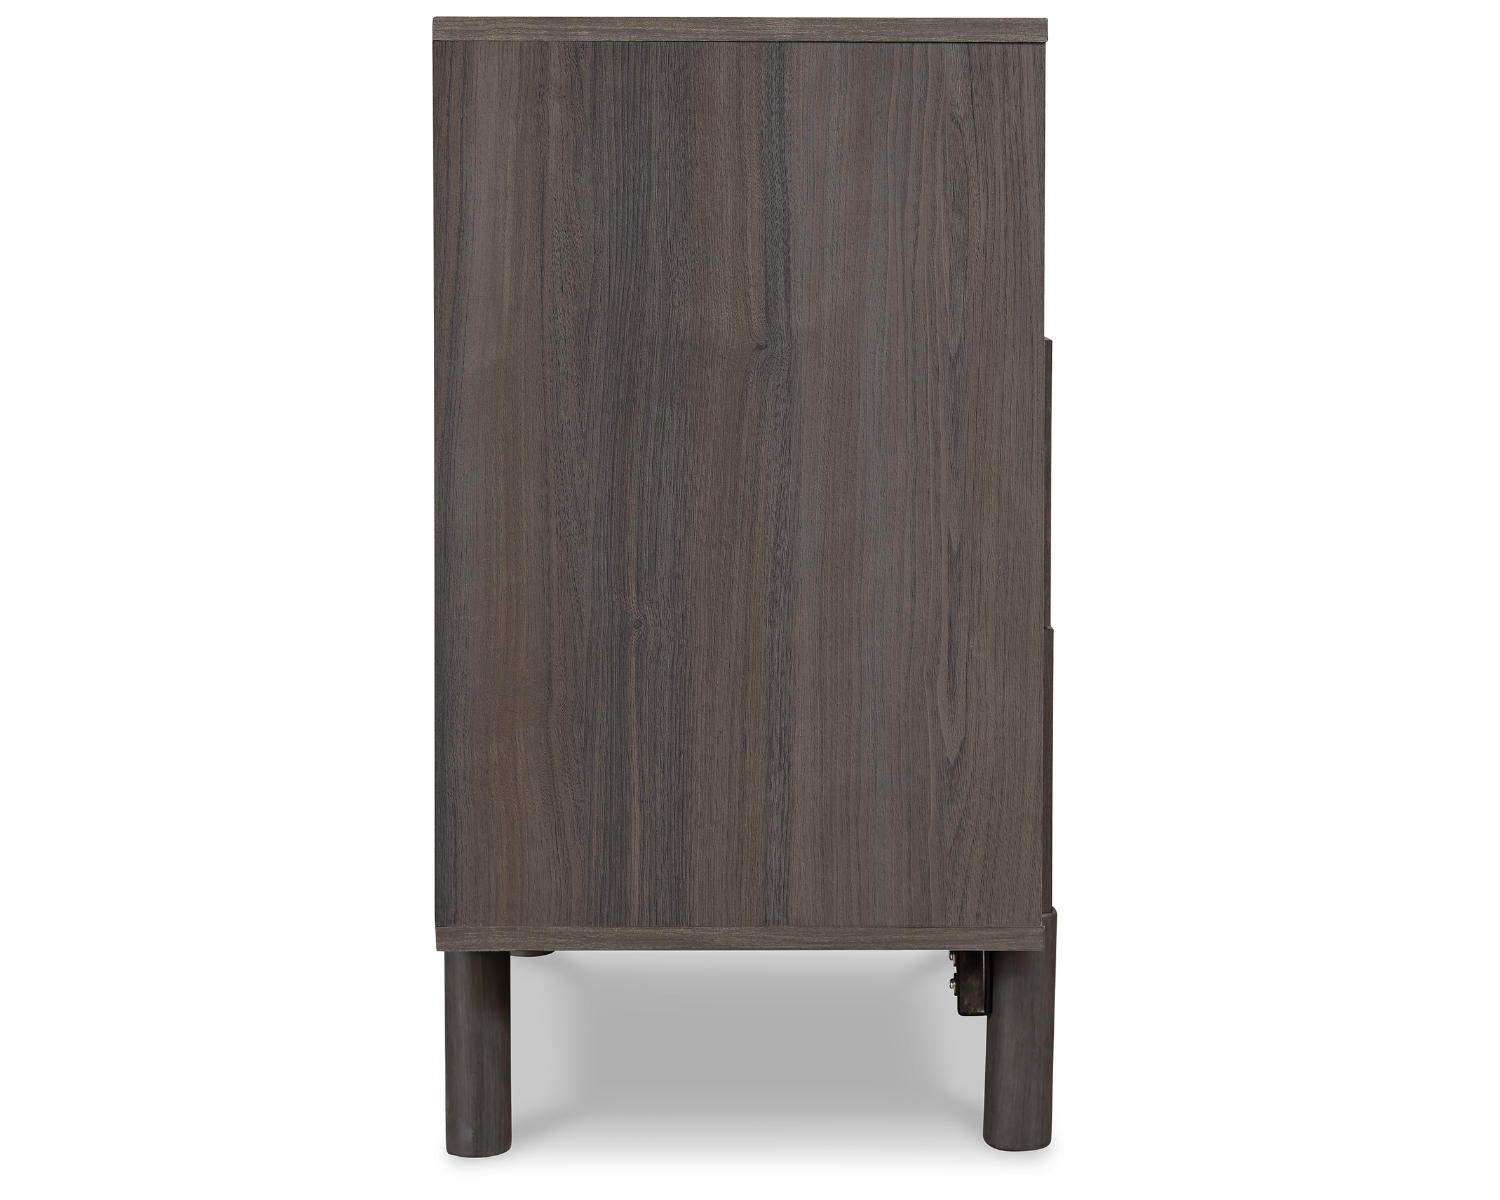 Signature Design by Ashley Brymont Mid-Century Modern 3 Drawer Chest of Drawers, Dark Gray - image 5 of 6